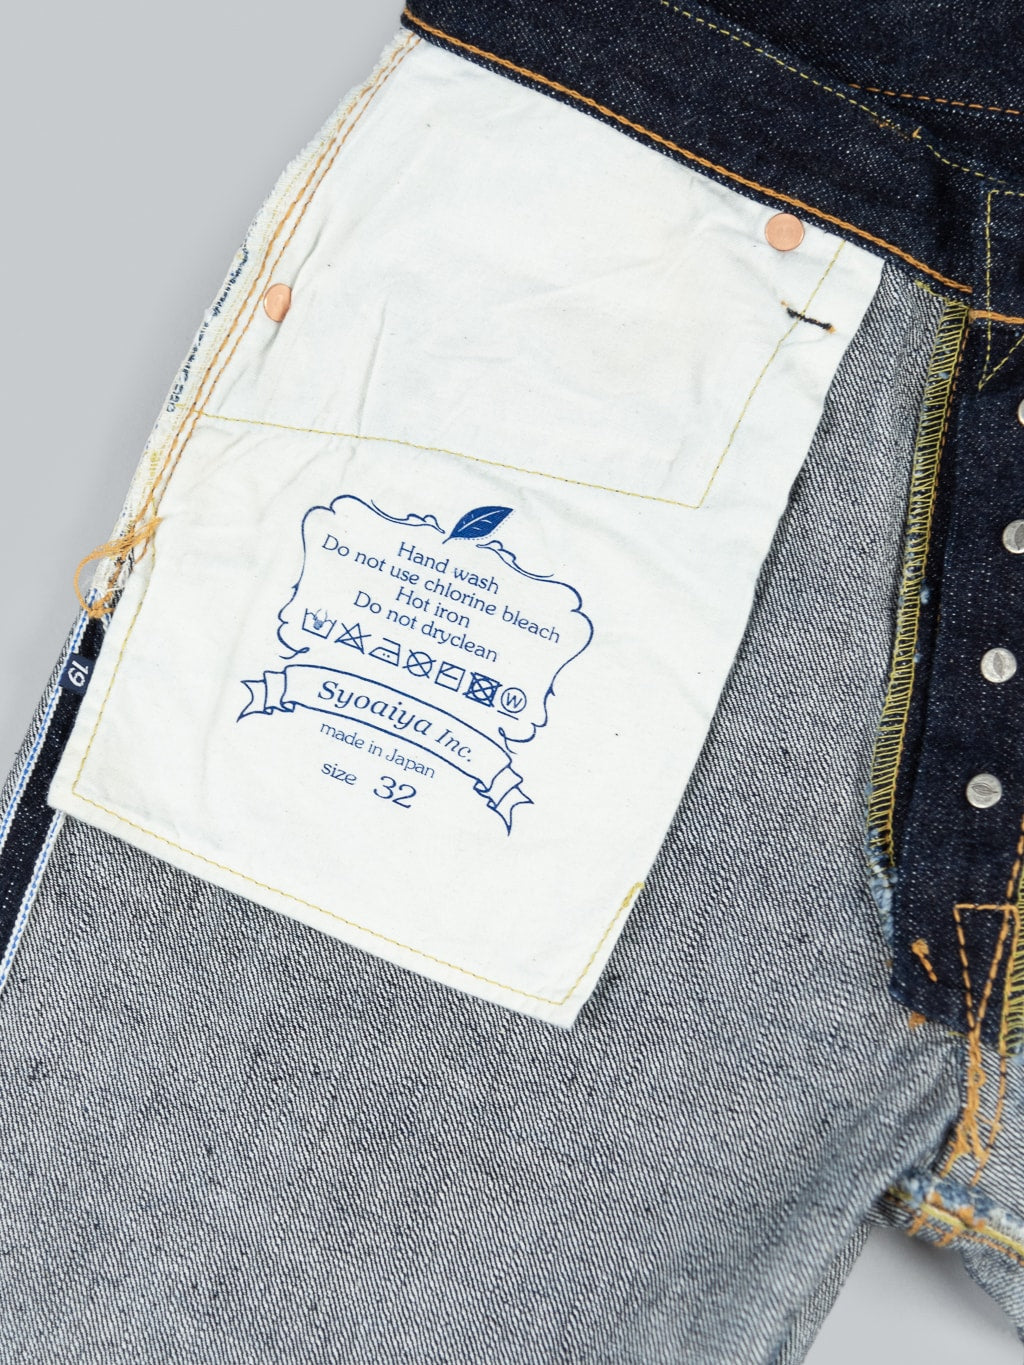 Pure Blue Japan Relaxed Tapered denim jeans interior pocket bag